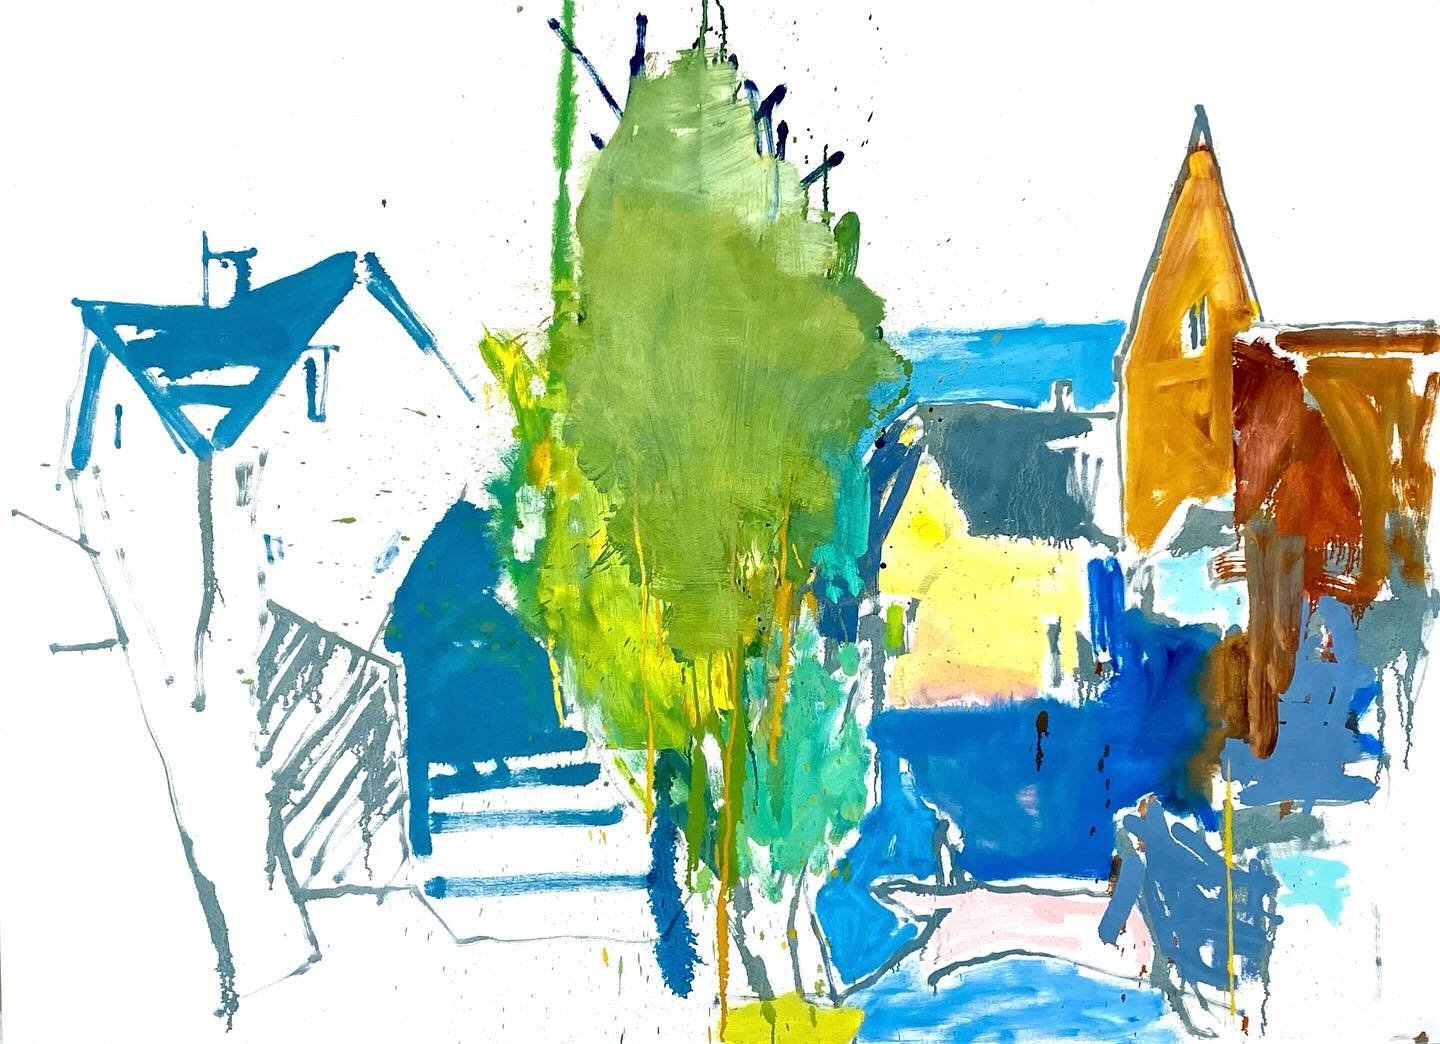 Just in to the gallery - this piece by @mattschaeferartist , &ldquo;Our Town.&rdquo; With the use of line and color, Matt creates an expressive piece that highlights the beauty of &ldquo;our town.&rdquo; With its abstract qualities, the piece transce